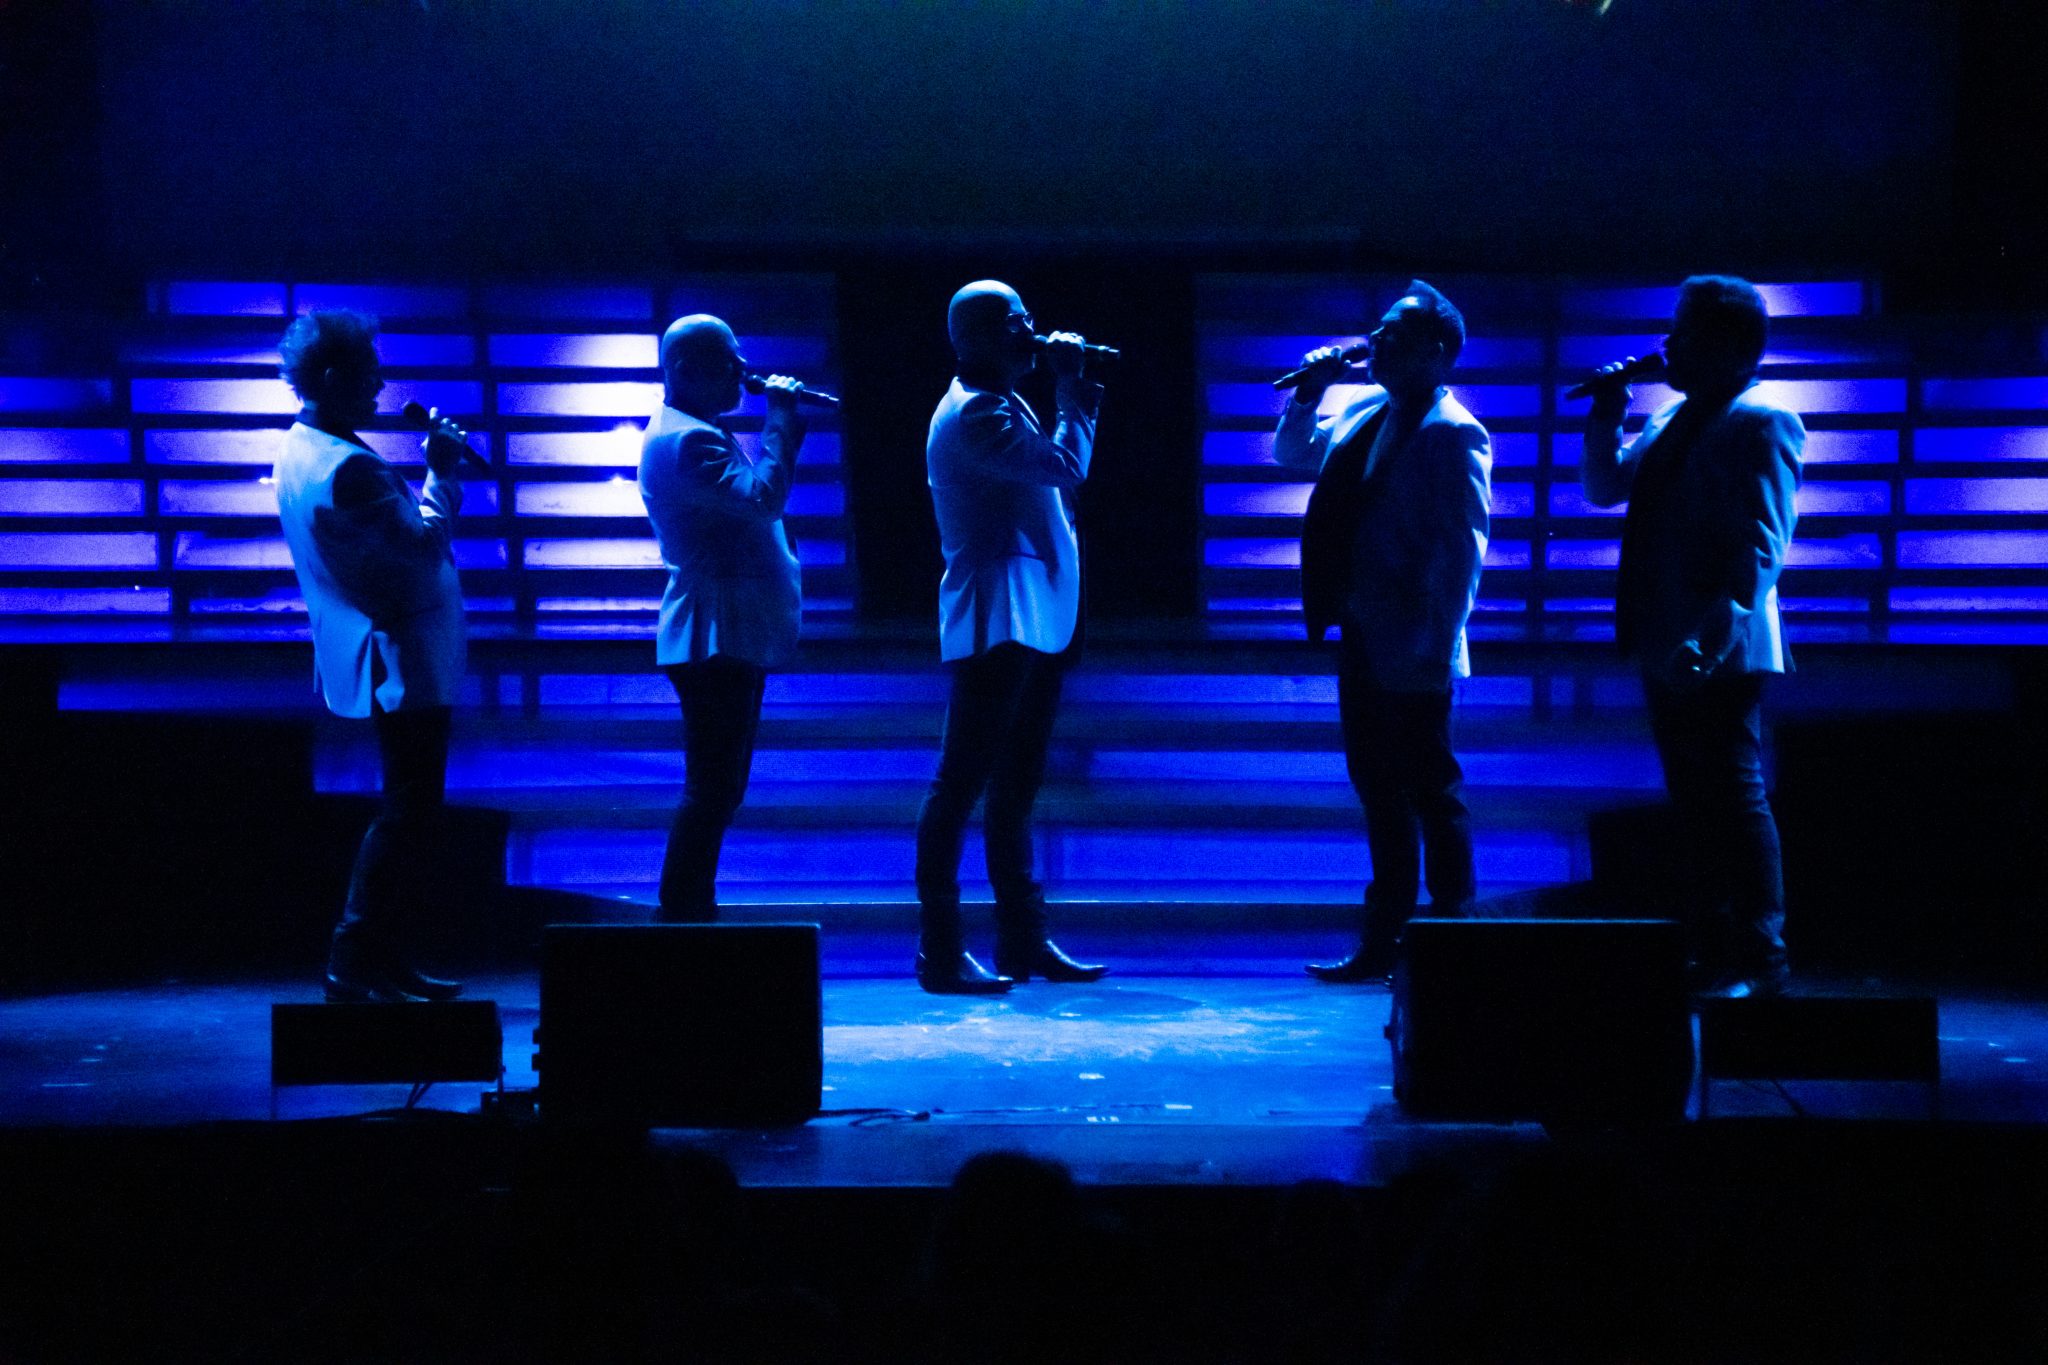 SIX performing bathed in blue stage lights